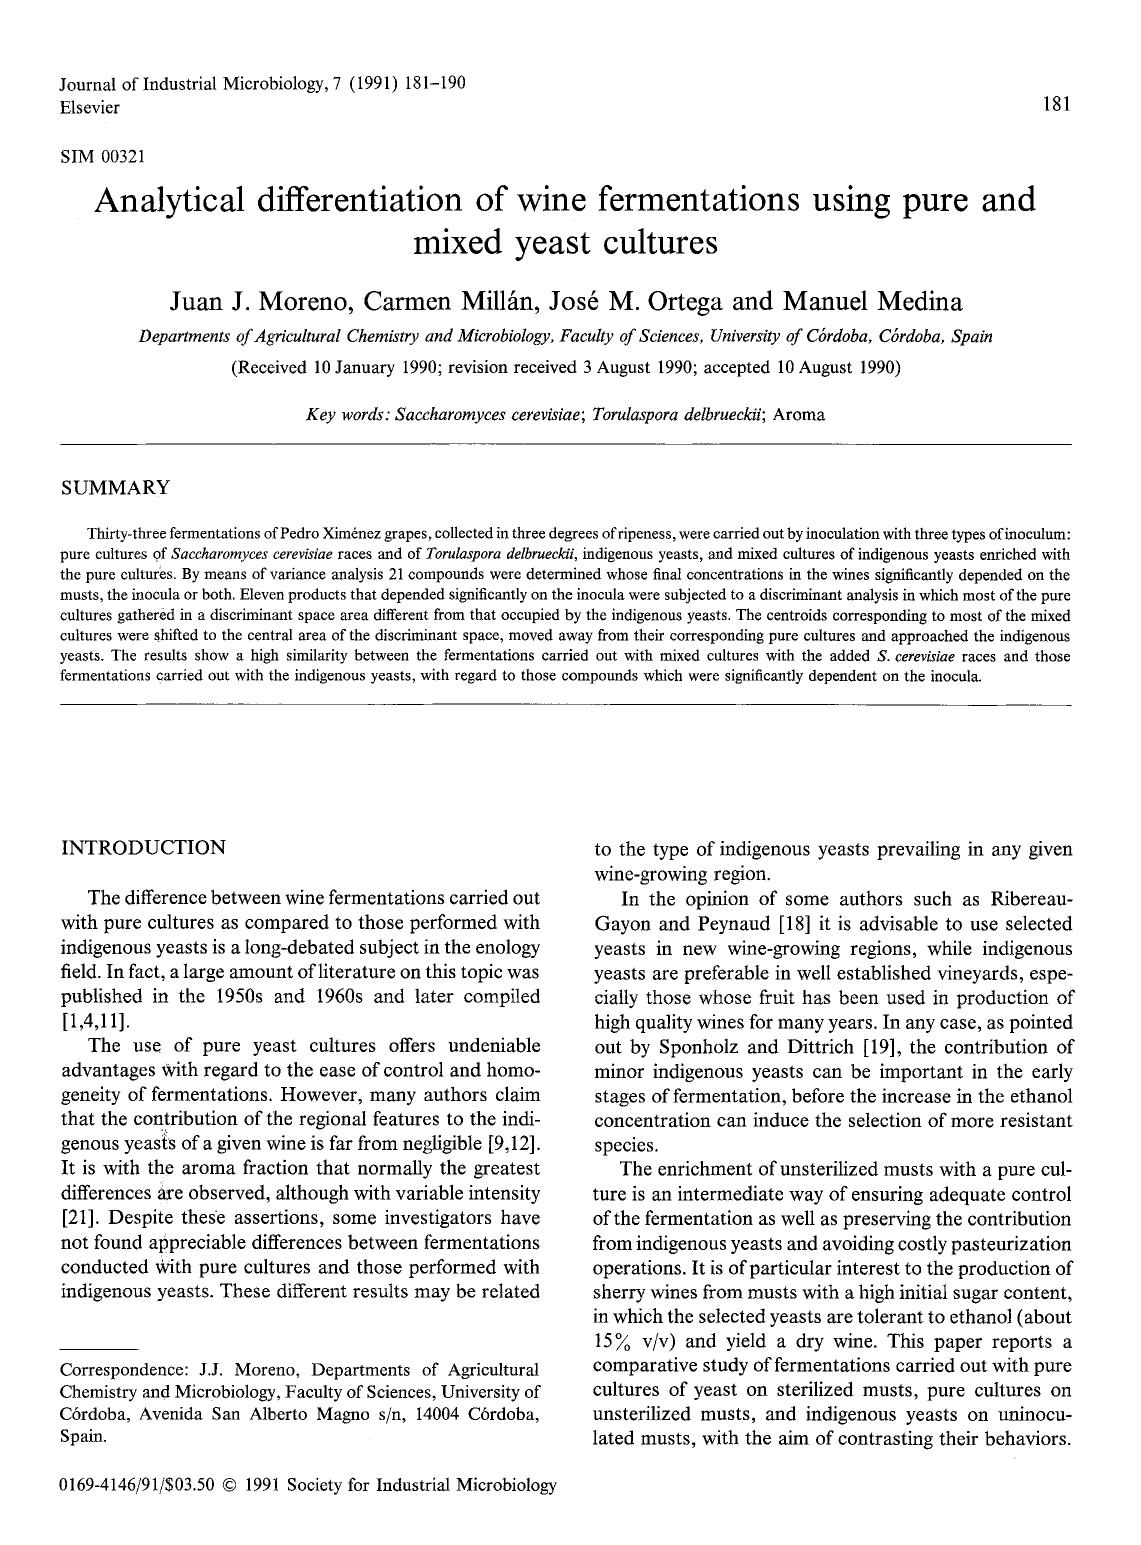 Analytical differentiation of wine fermentations using pure and mixed yeast cultures by Unknown